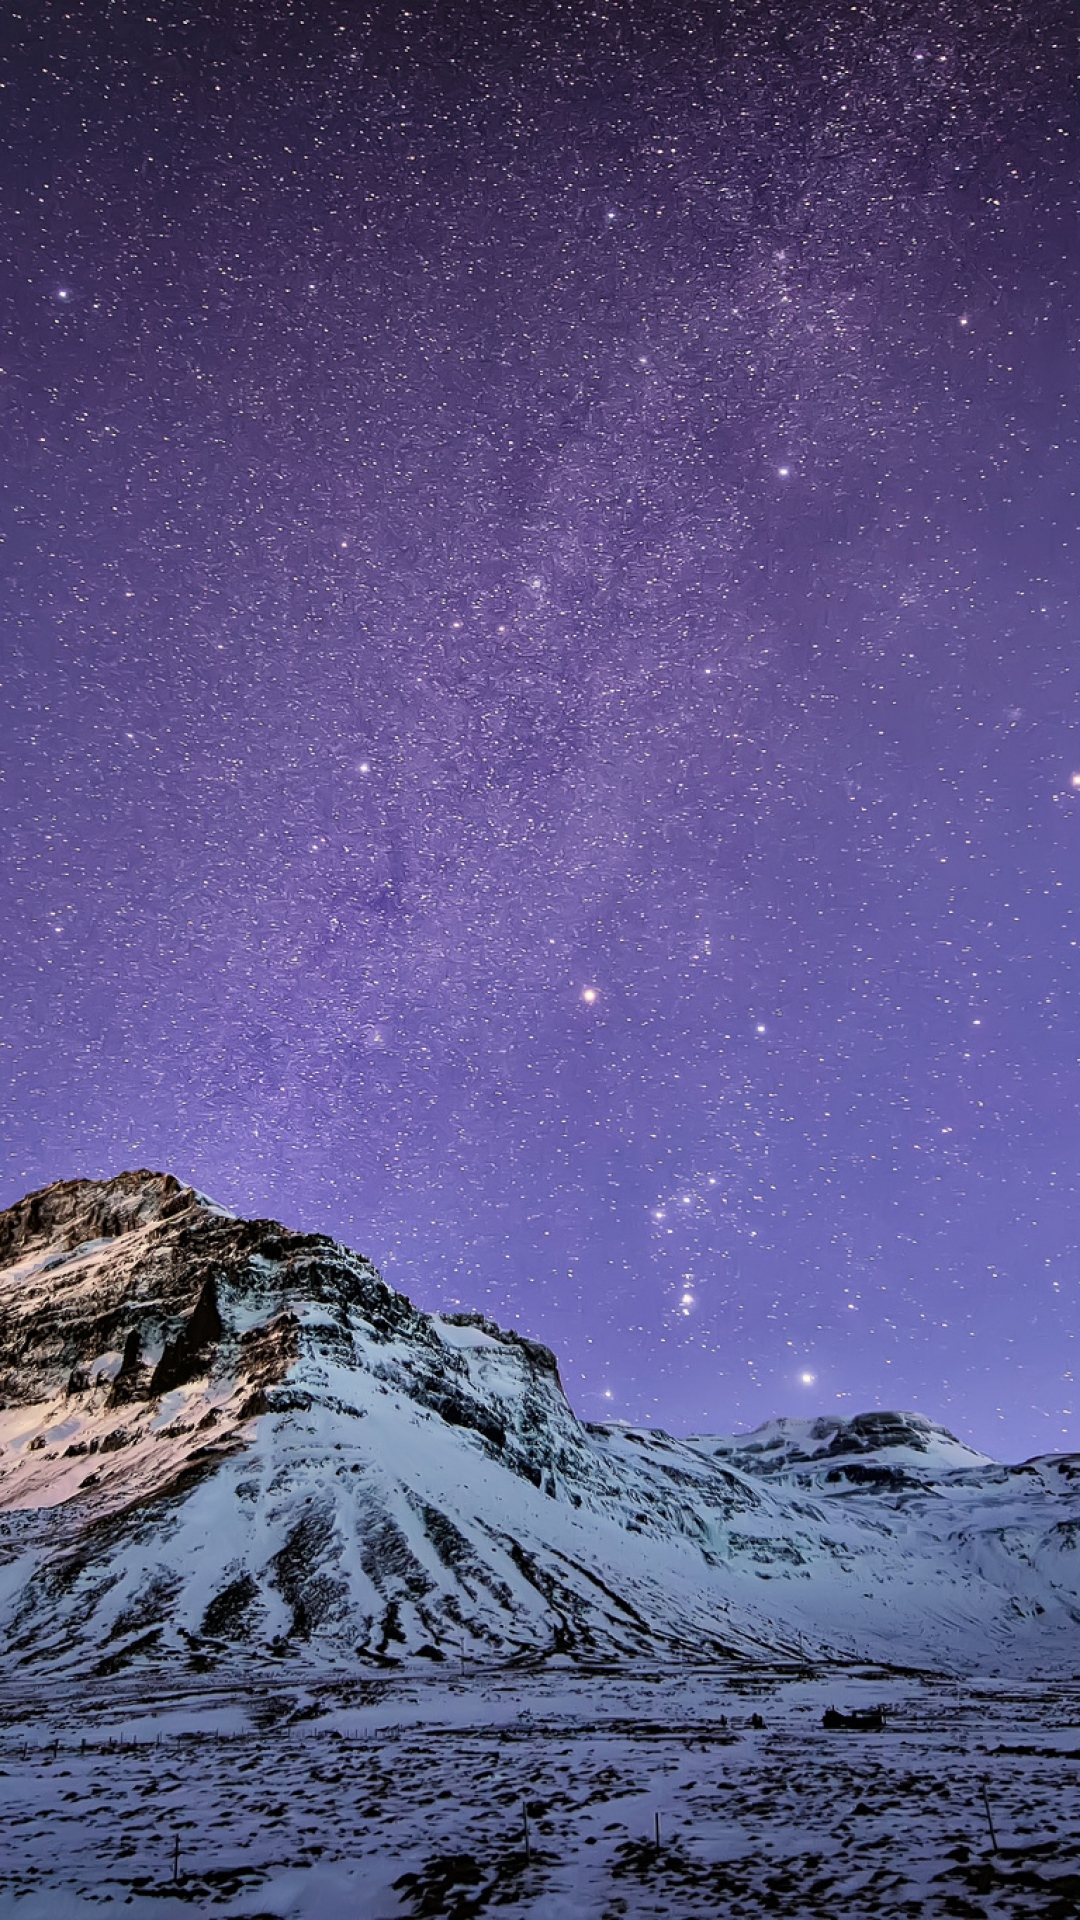 Snow Mountain and Stars